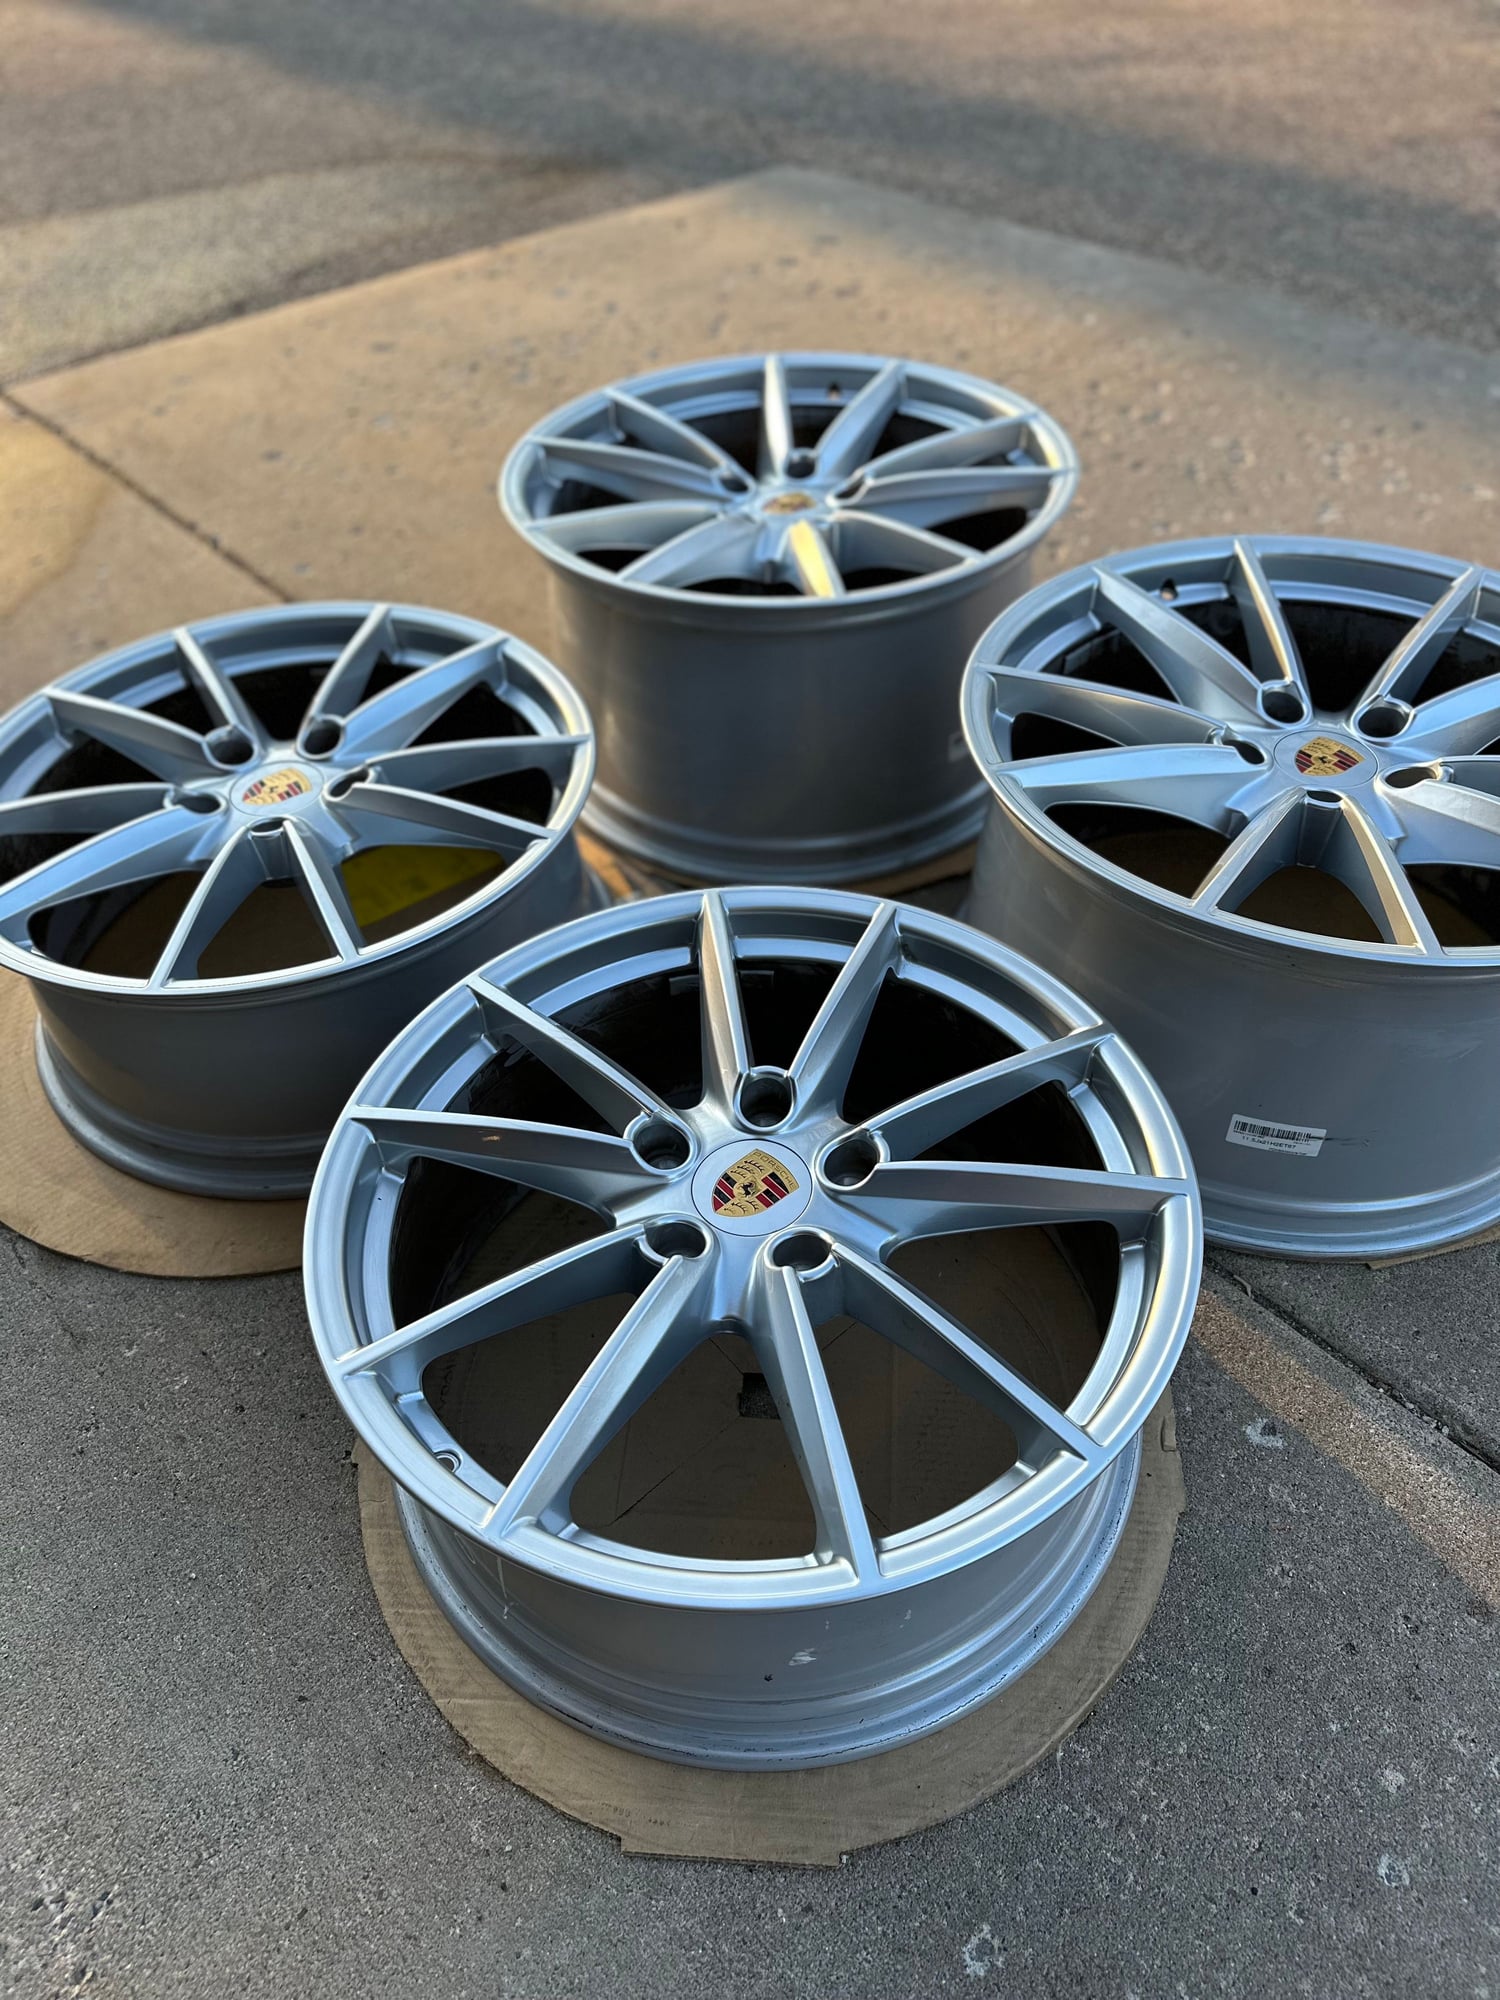 2020 Porsche Cayenne - 20/21" 992 Carrera S Summer Wheels - Silver - Excellent Condition - 991 997 - Wheels and Tires/Axles - $2,950 - Plymouth, MN 55447, United States